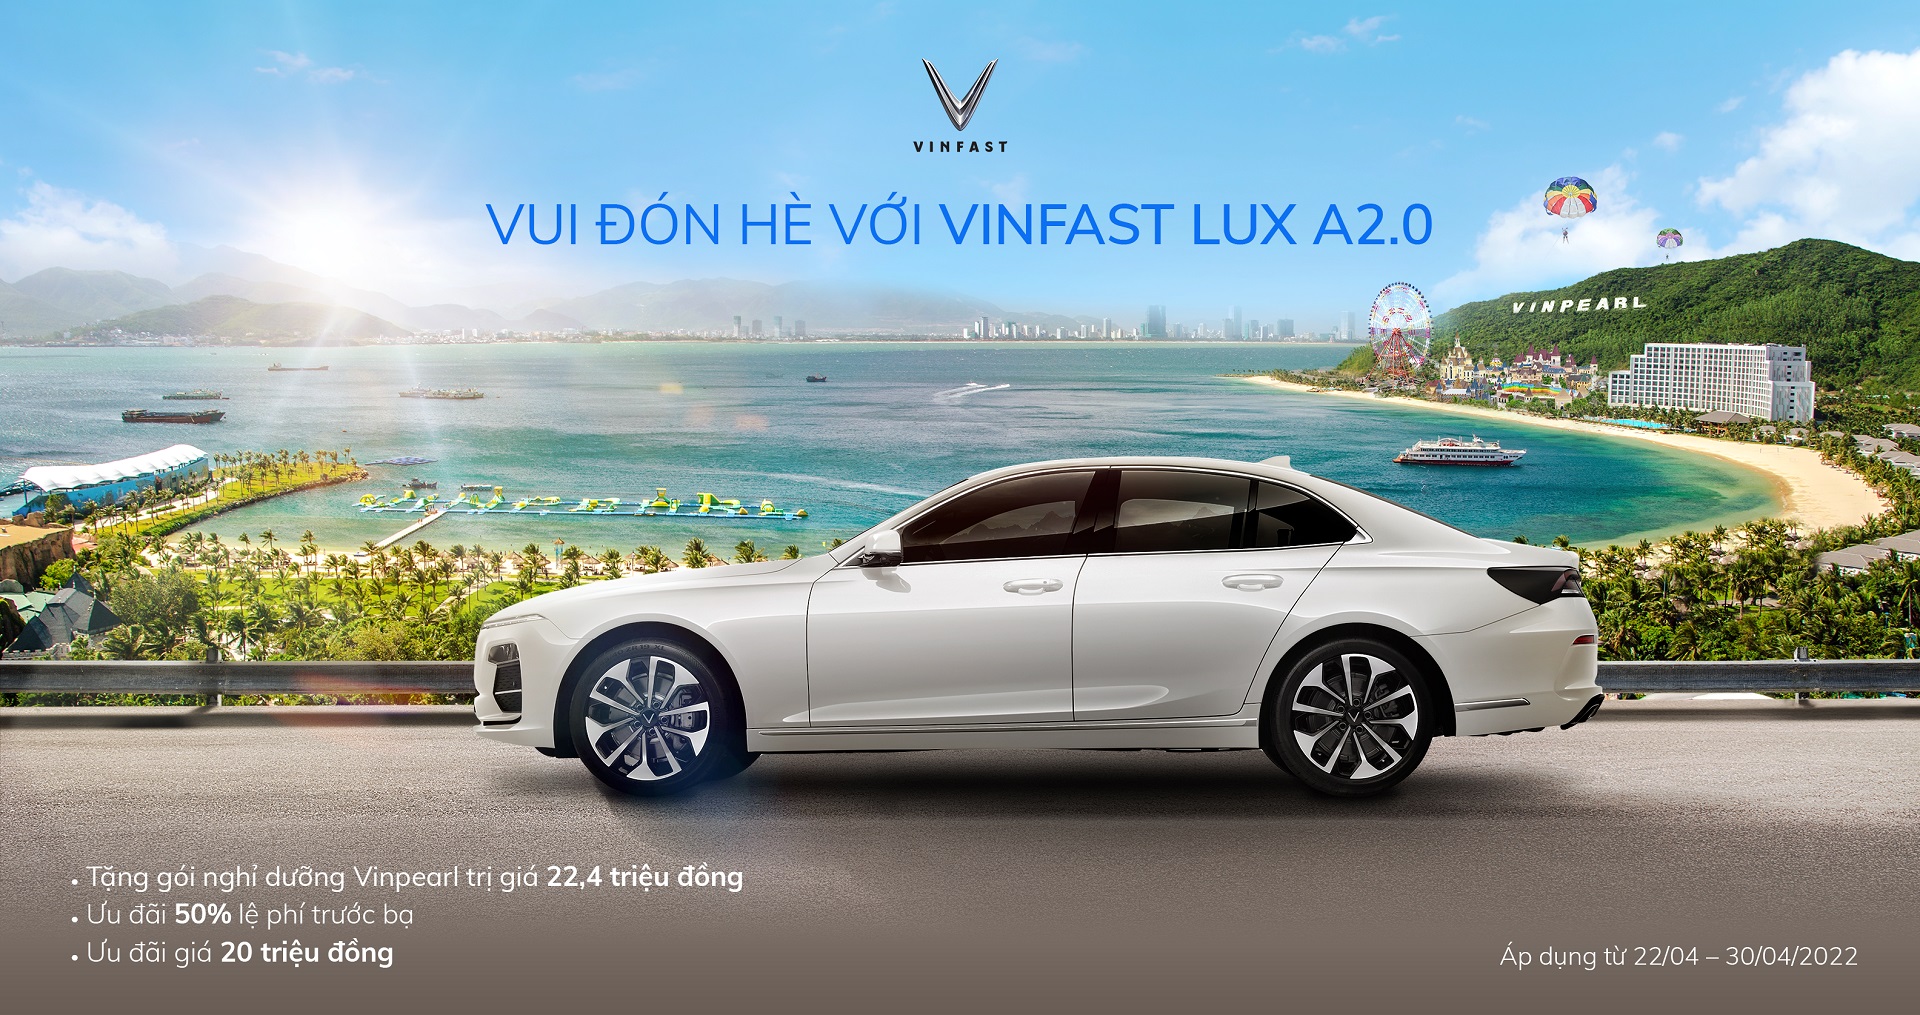 Hello Summer 2022, VinFast offers a great offer only until the end of April - Photo 1.